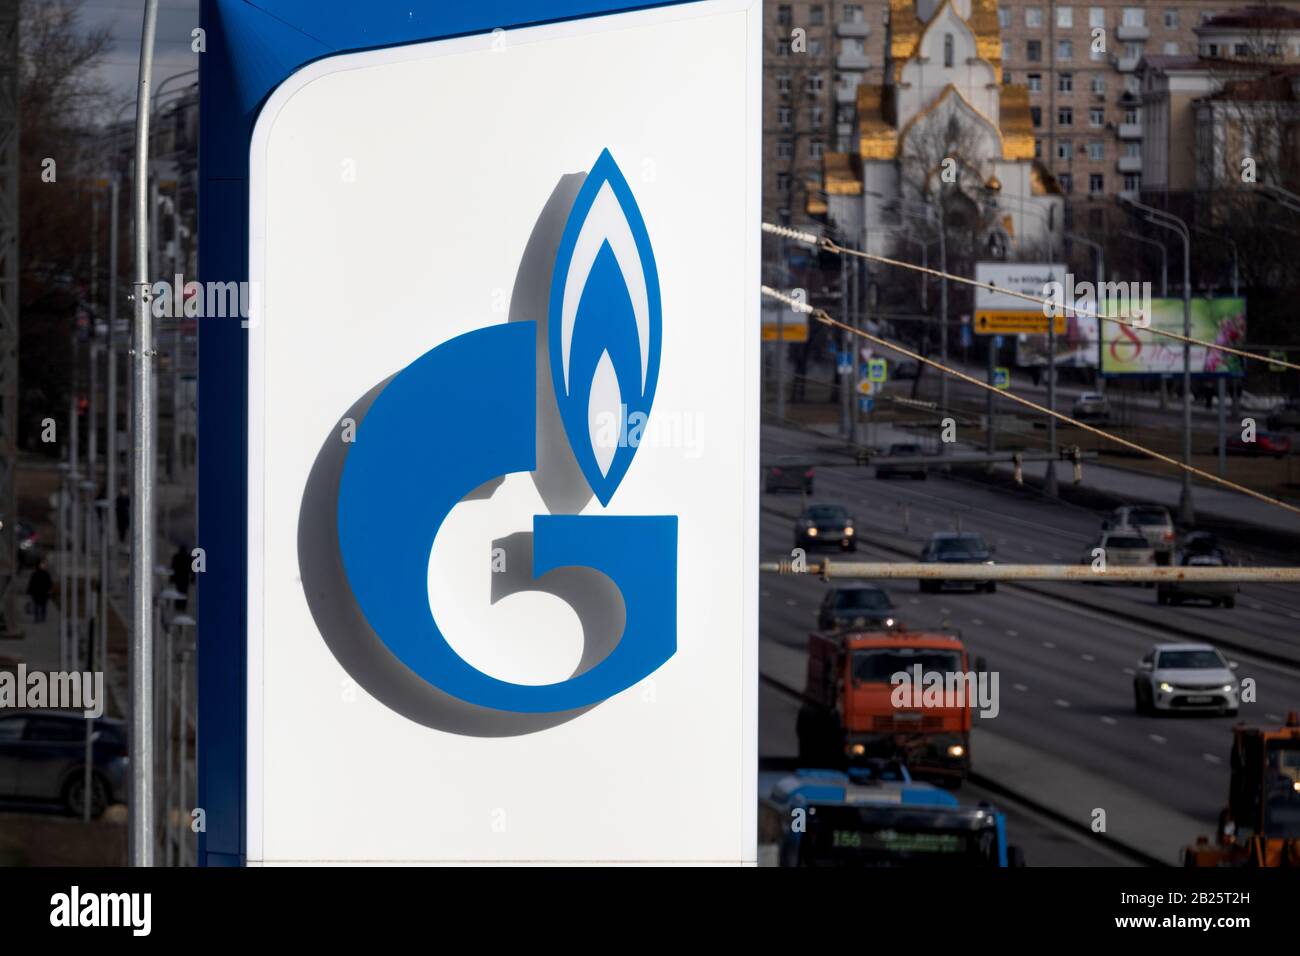 Russian energy corporation Gazprom logo at a gas station on the background of Andropov Avenue in Moscow, Russia Stock Photo